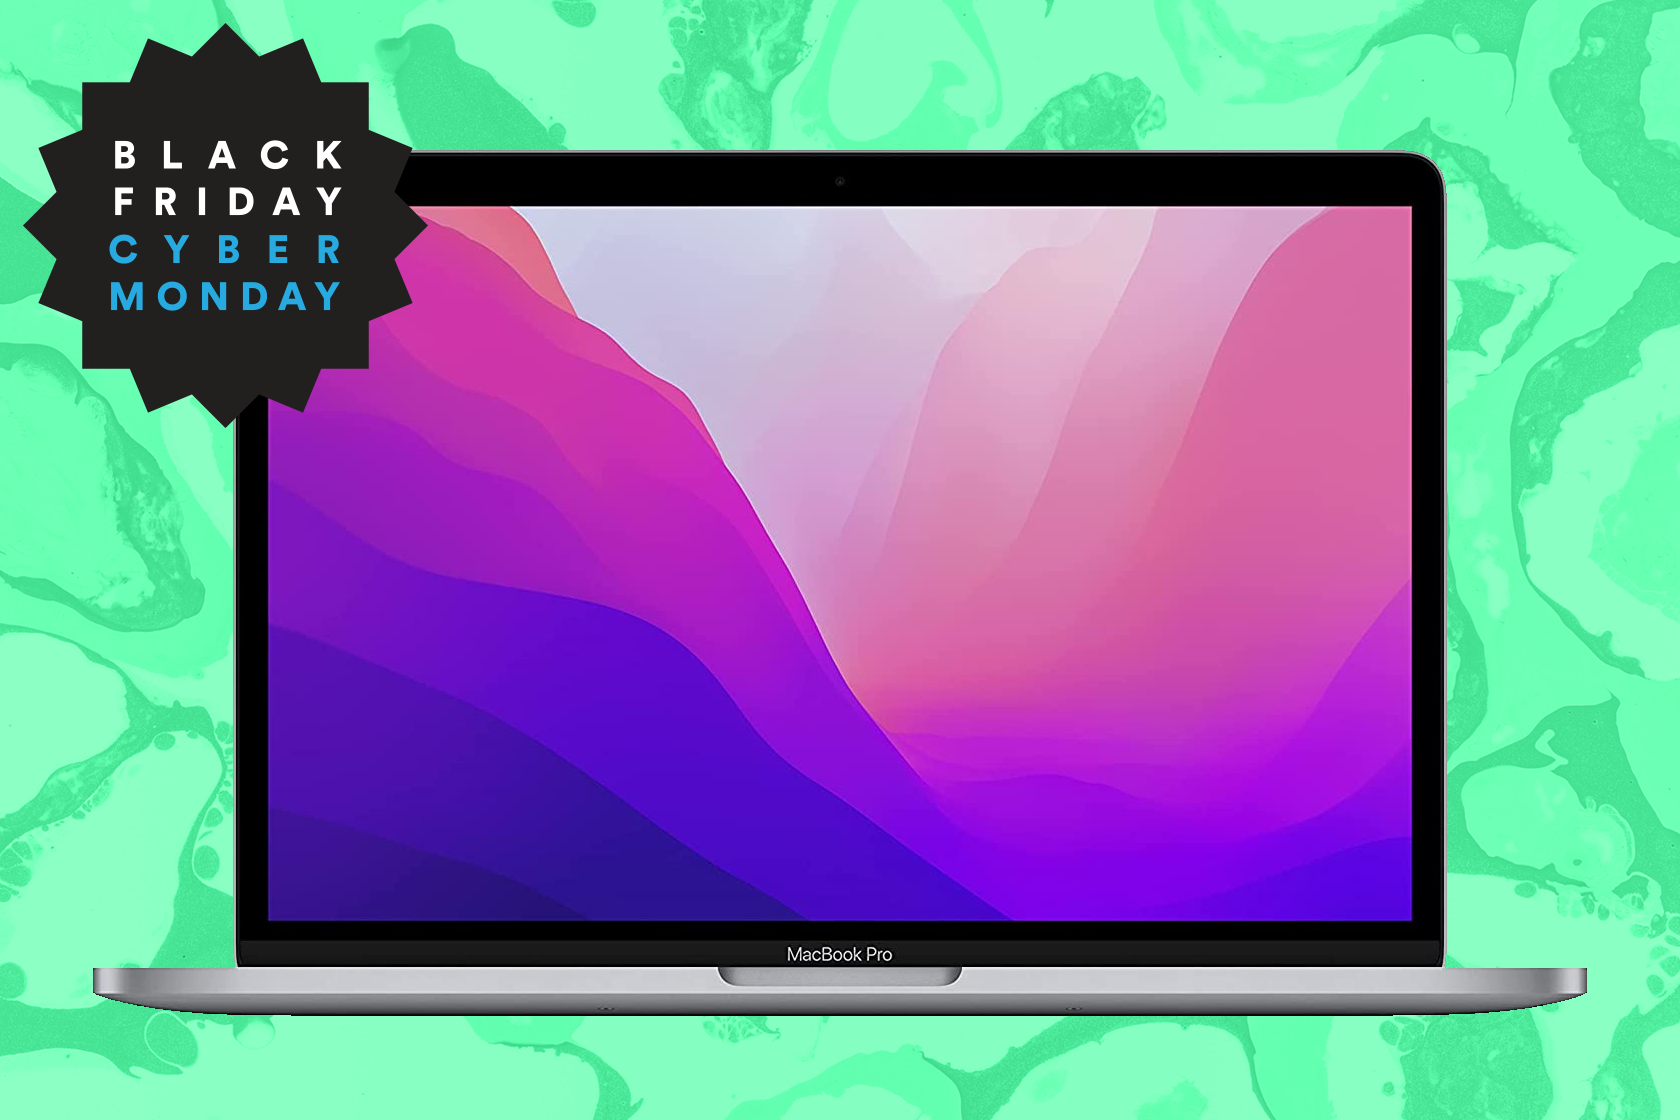 Apple Cyber Monday deal Save 150 on the new MacBook Pro right now